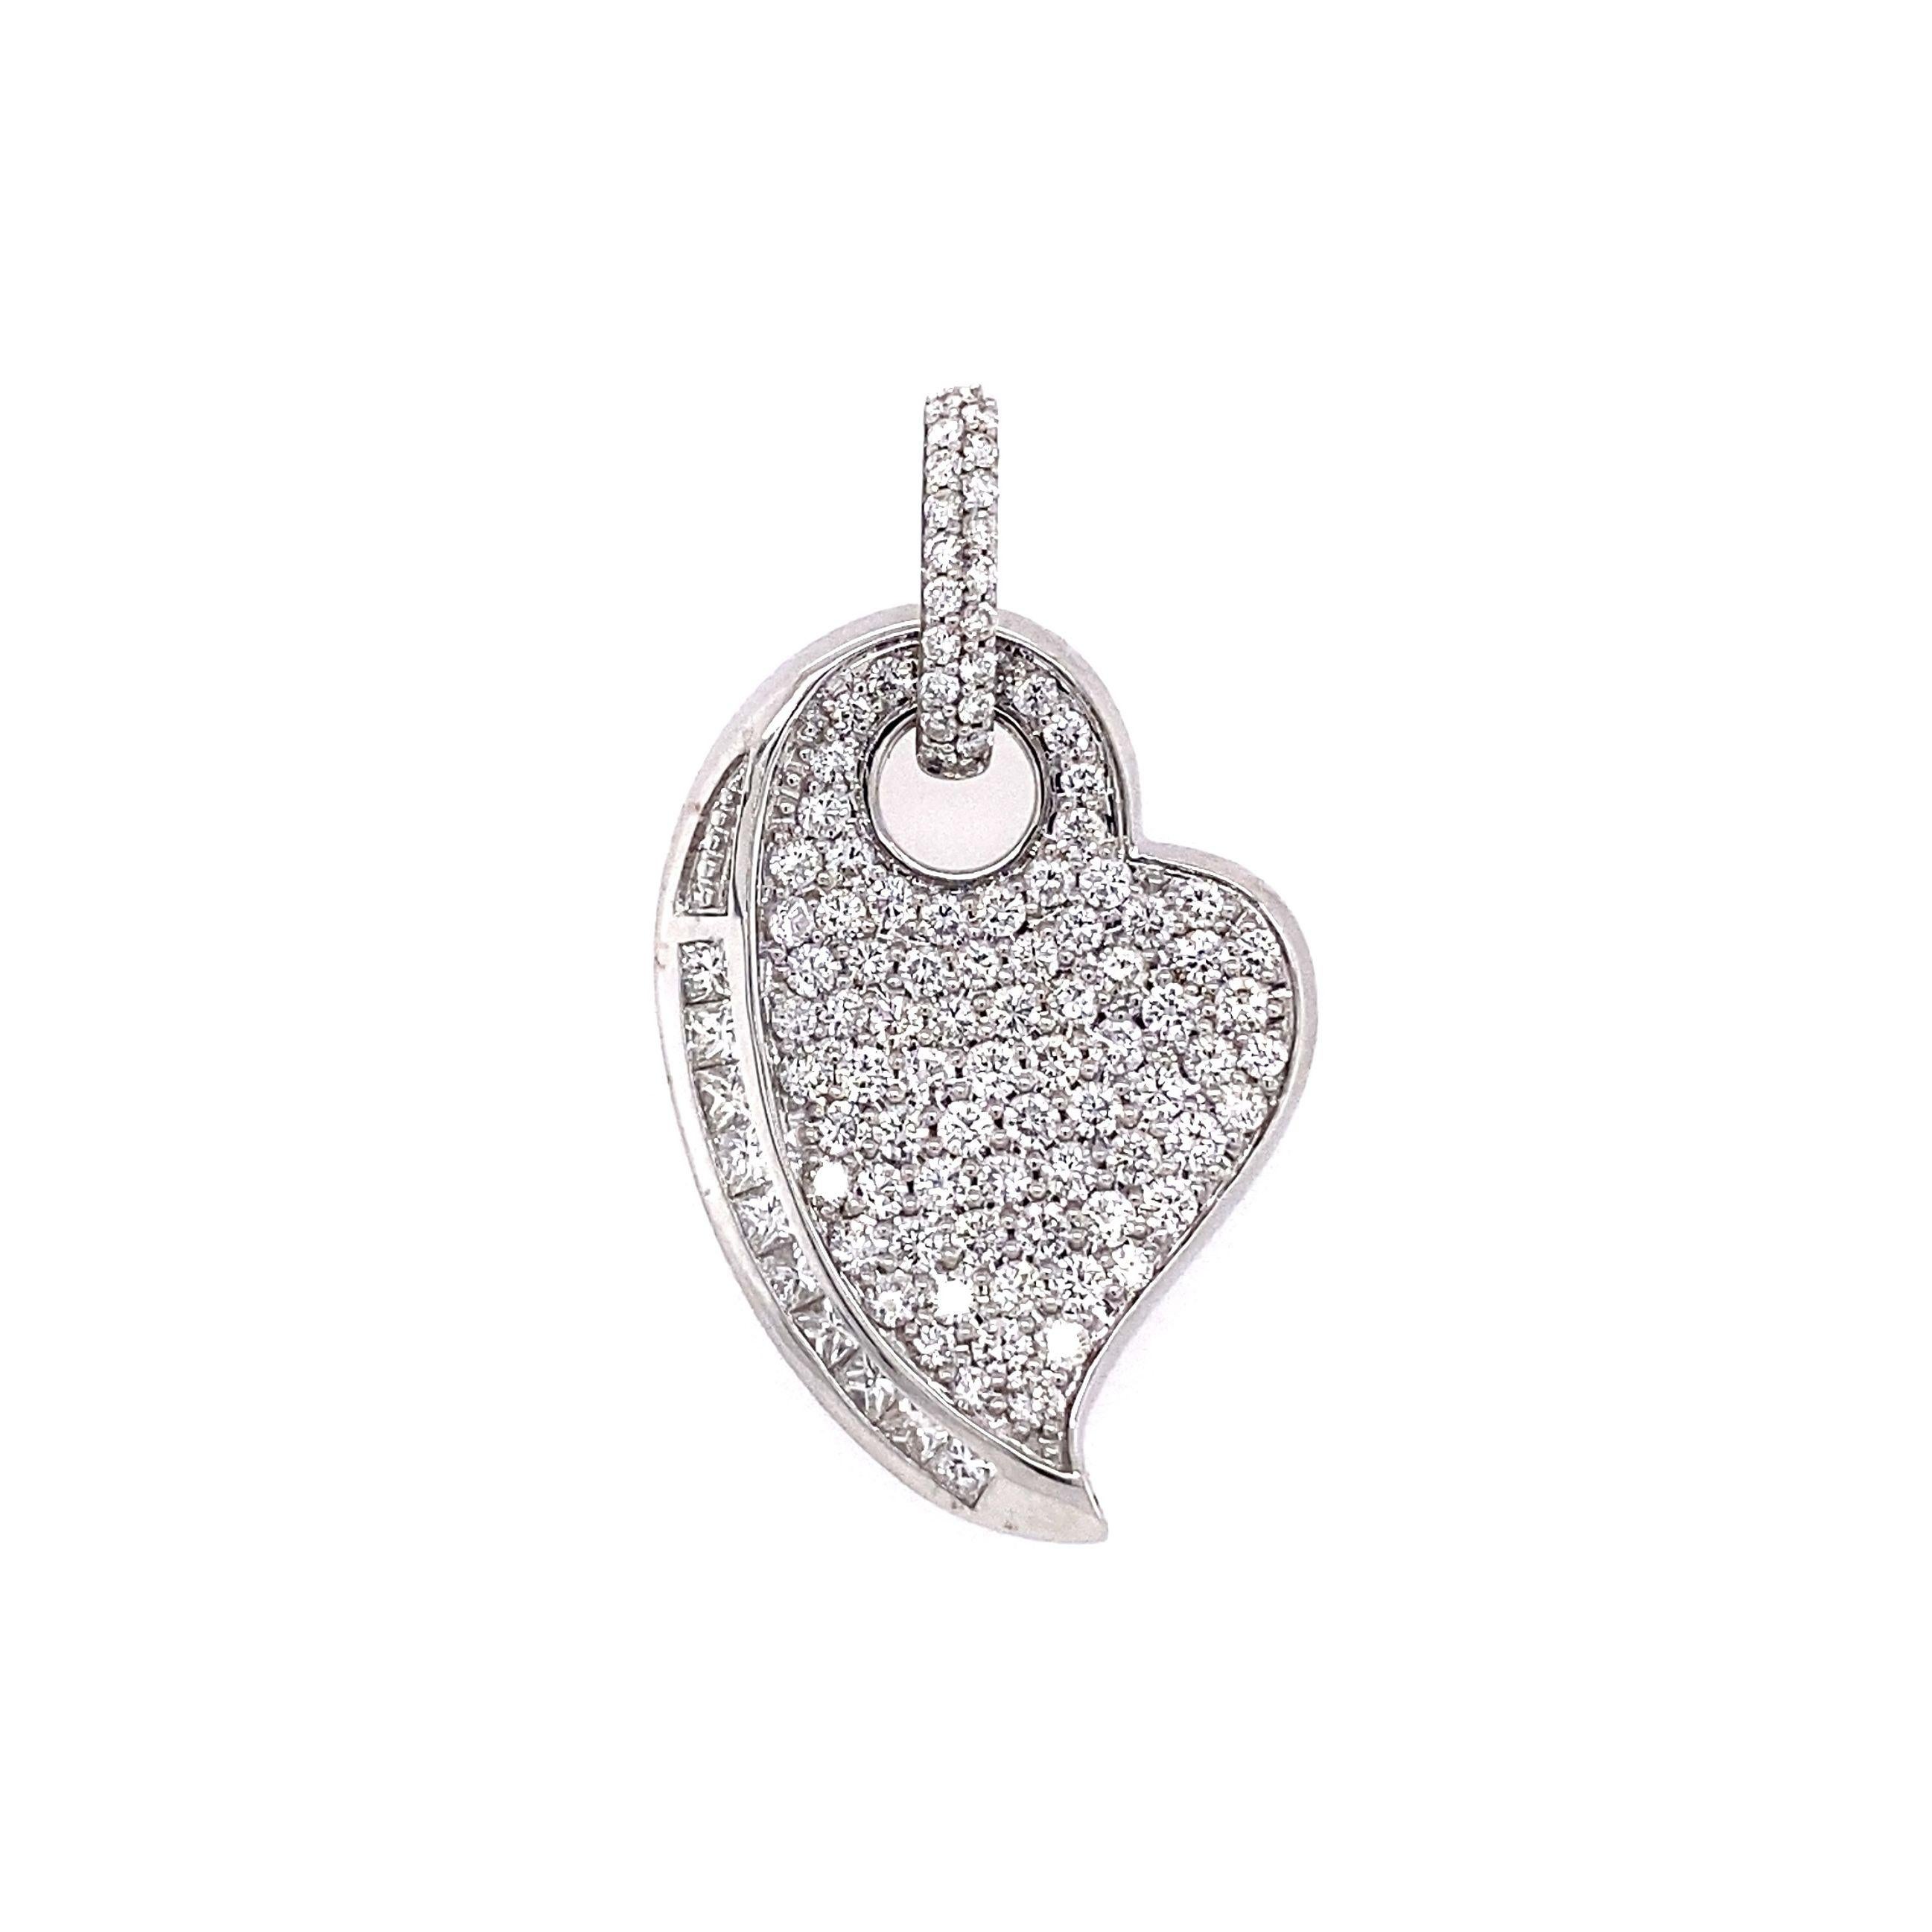 Simply Beautiful! Diamond Heart 18K Gold Pendant. Hand set Diamonds, weighing approx. 2.18tcw and Rubies approx. 1.48tcw. Hand crafted on the bias 18K White mounting. Pendant measures approx. 1.3”. long. More Beautiful in Real time…A sure to be